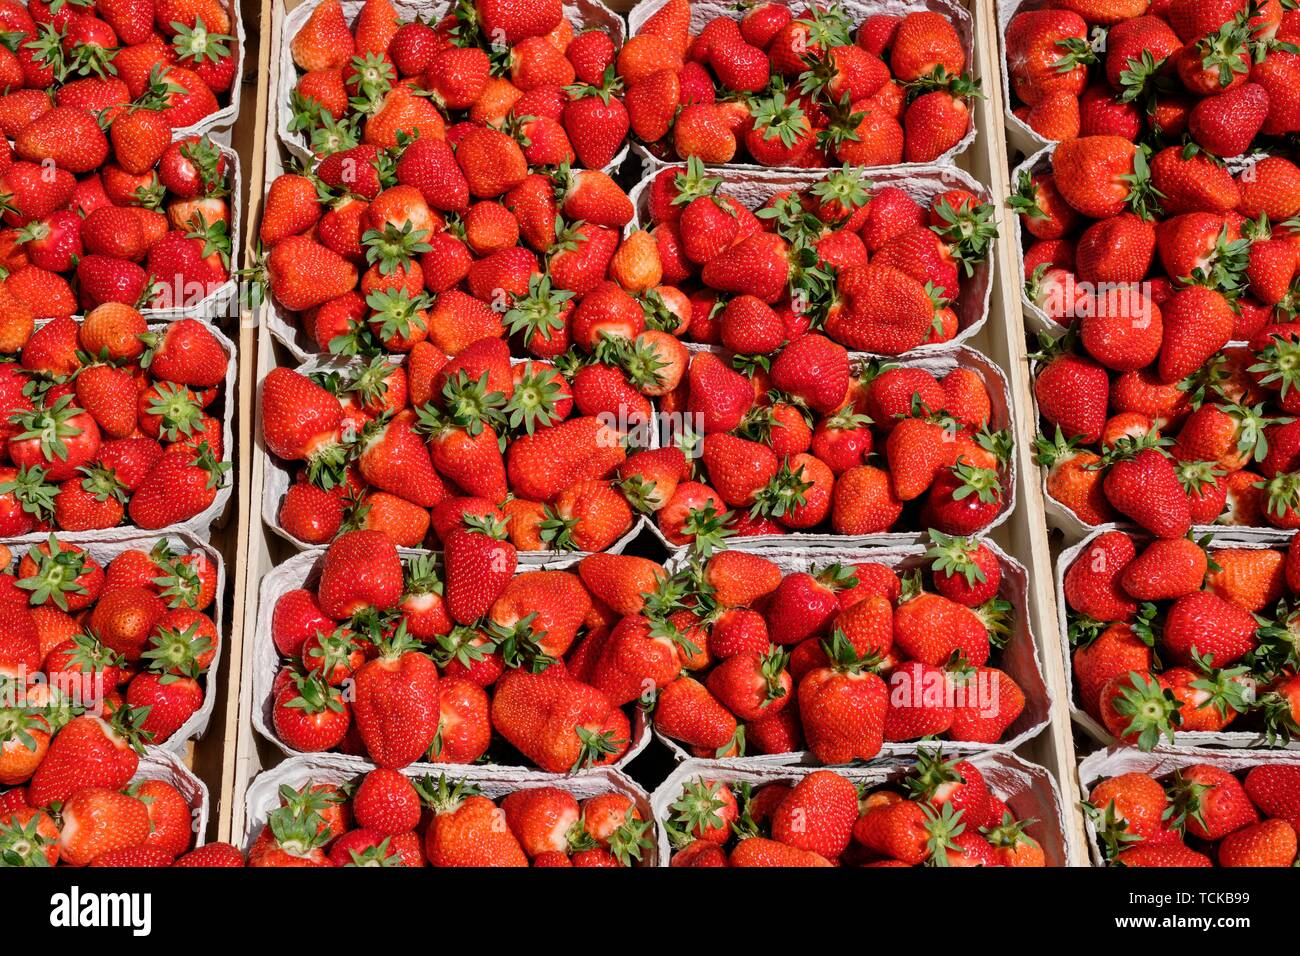 Freshly harvested strawberries for sale in portions in trays, Baden-Wurttemberg, Germany Stock Photo